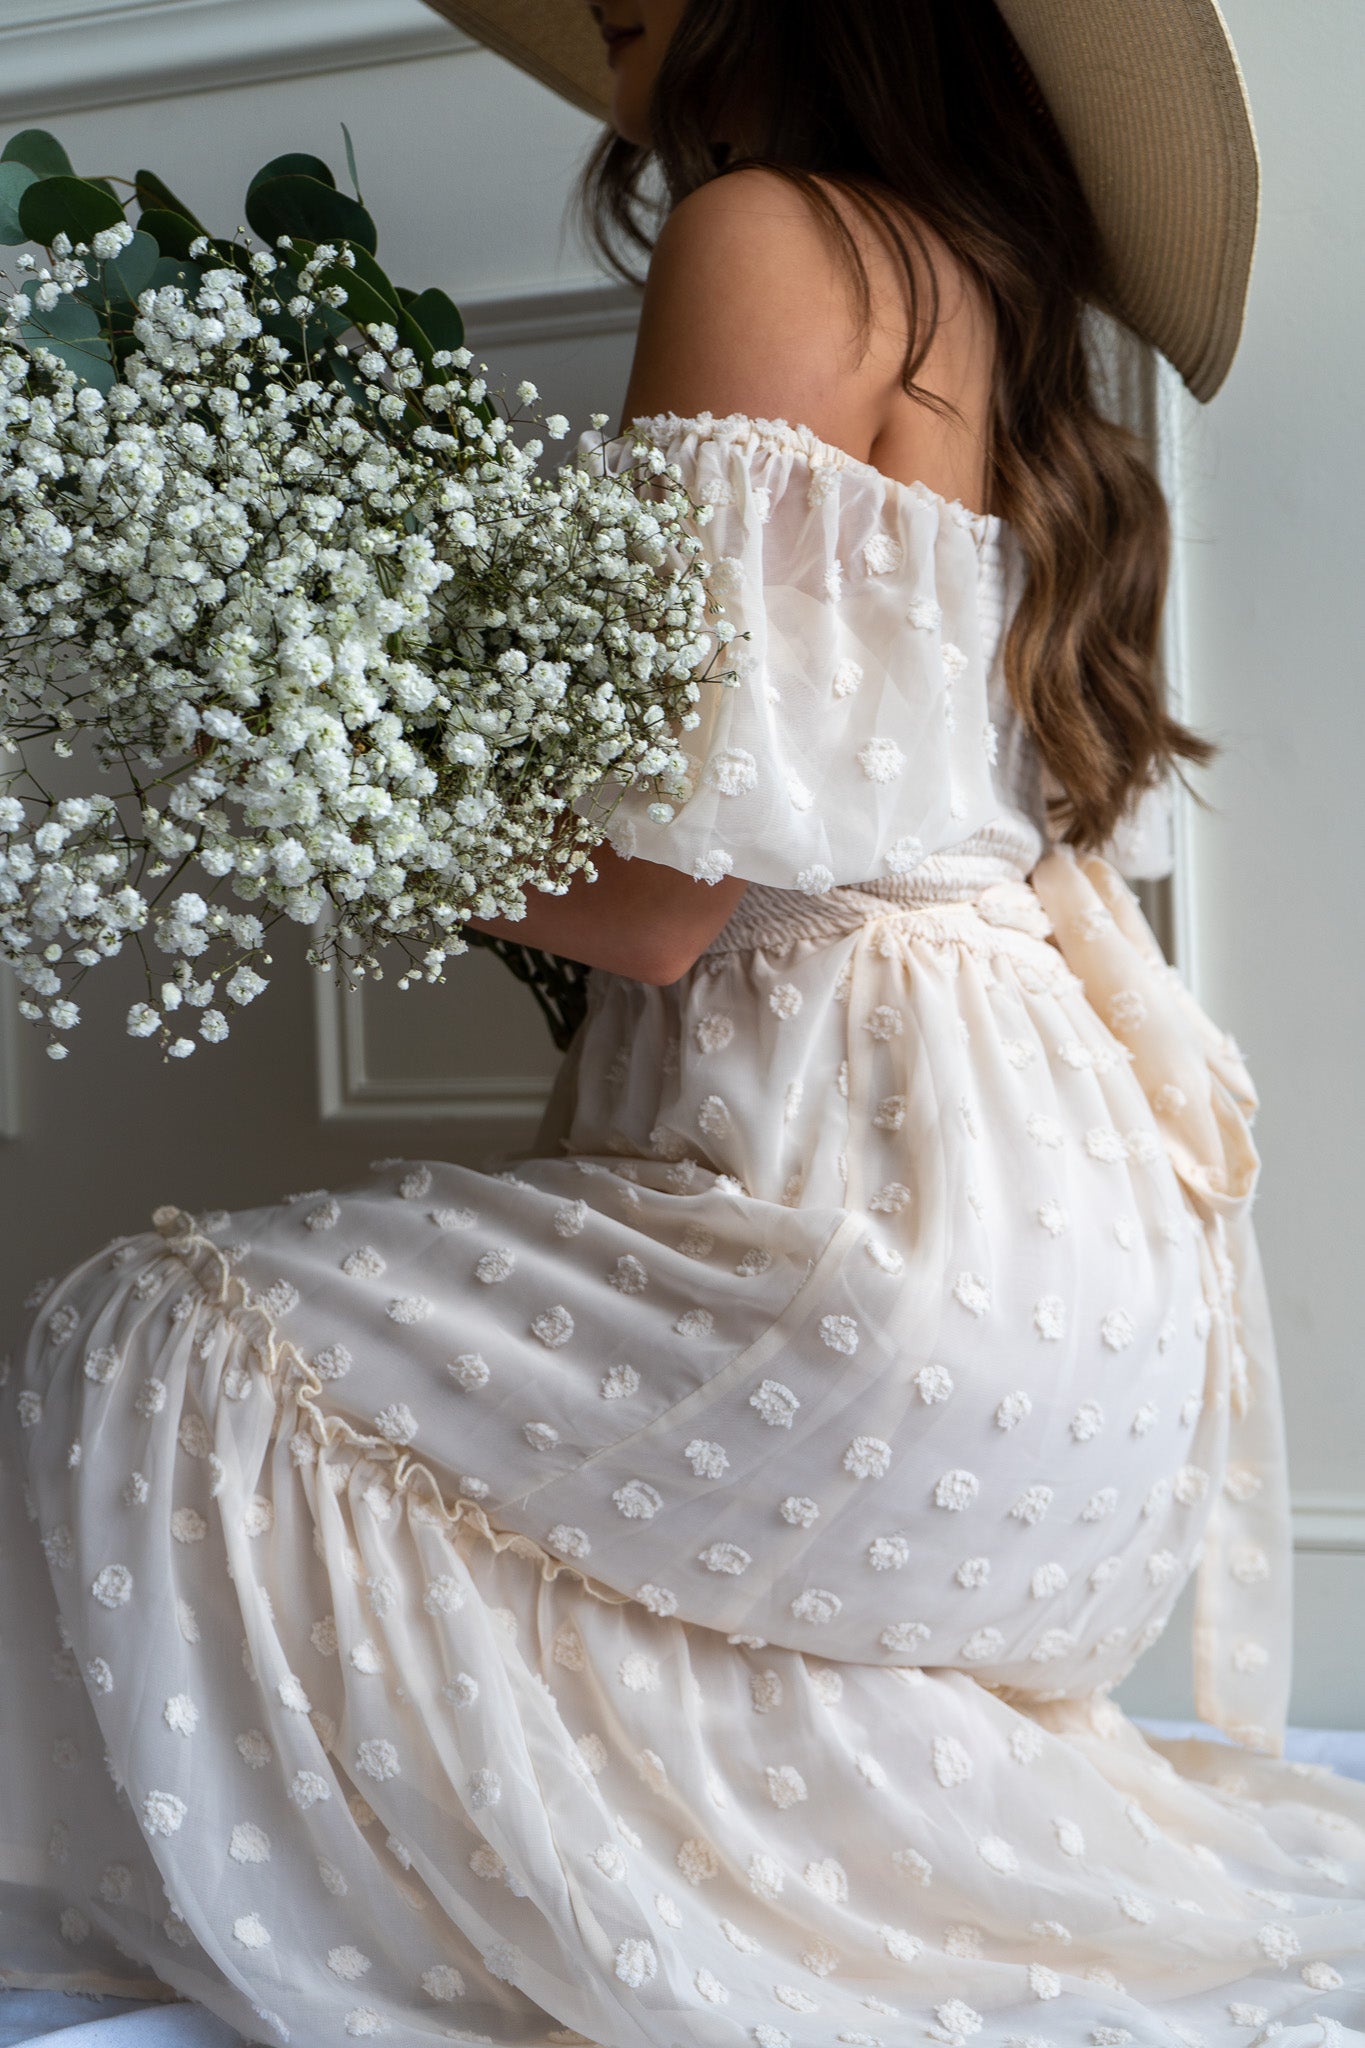 The Love Letter Maxi Dress: A stunning dress that is perfect for any bridal shower or engagement photo shoot.